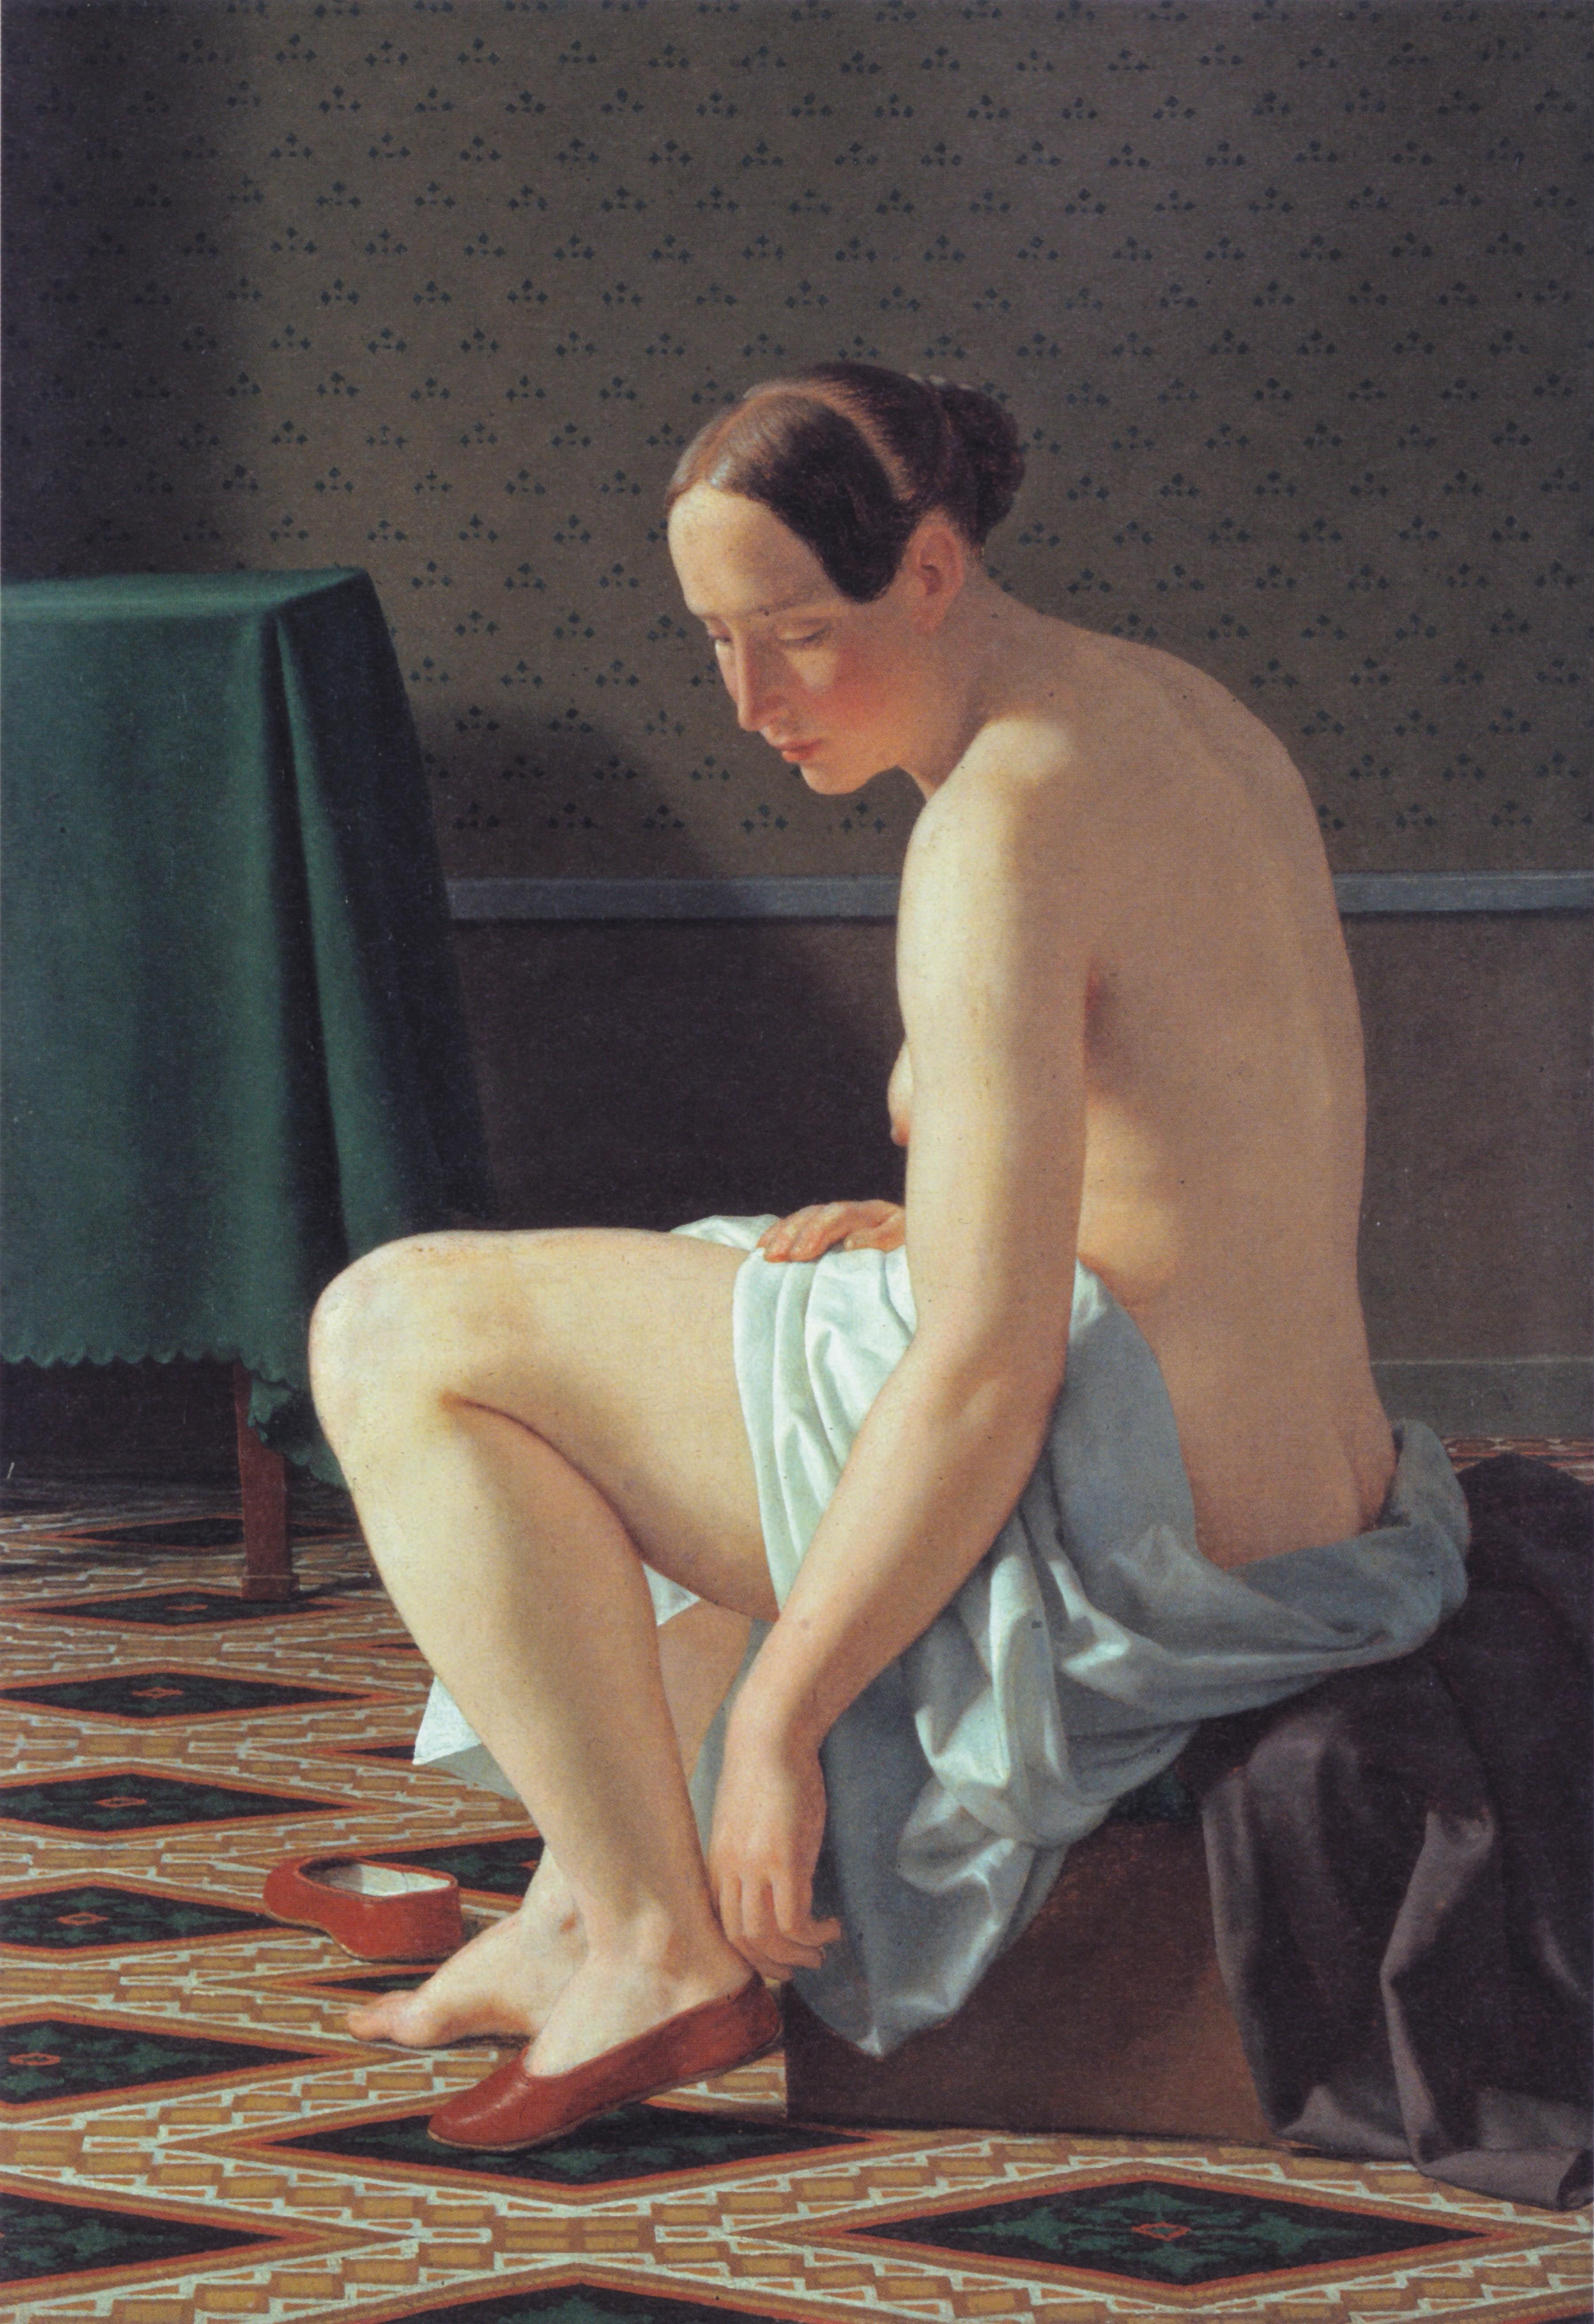 Julius EXNER
(Copenhagen, 1825 - Copenhagen, 1910)
Model stripping
Oil on canvas
H. 122 cm; L. 74 cm
Signed and dated 1842 lower right


Exhibition: most likely Charlottenborg Salon of 1845, under number 110, titled Modelfigur, awarded with a silver